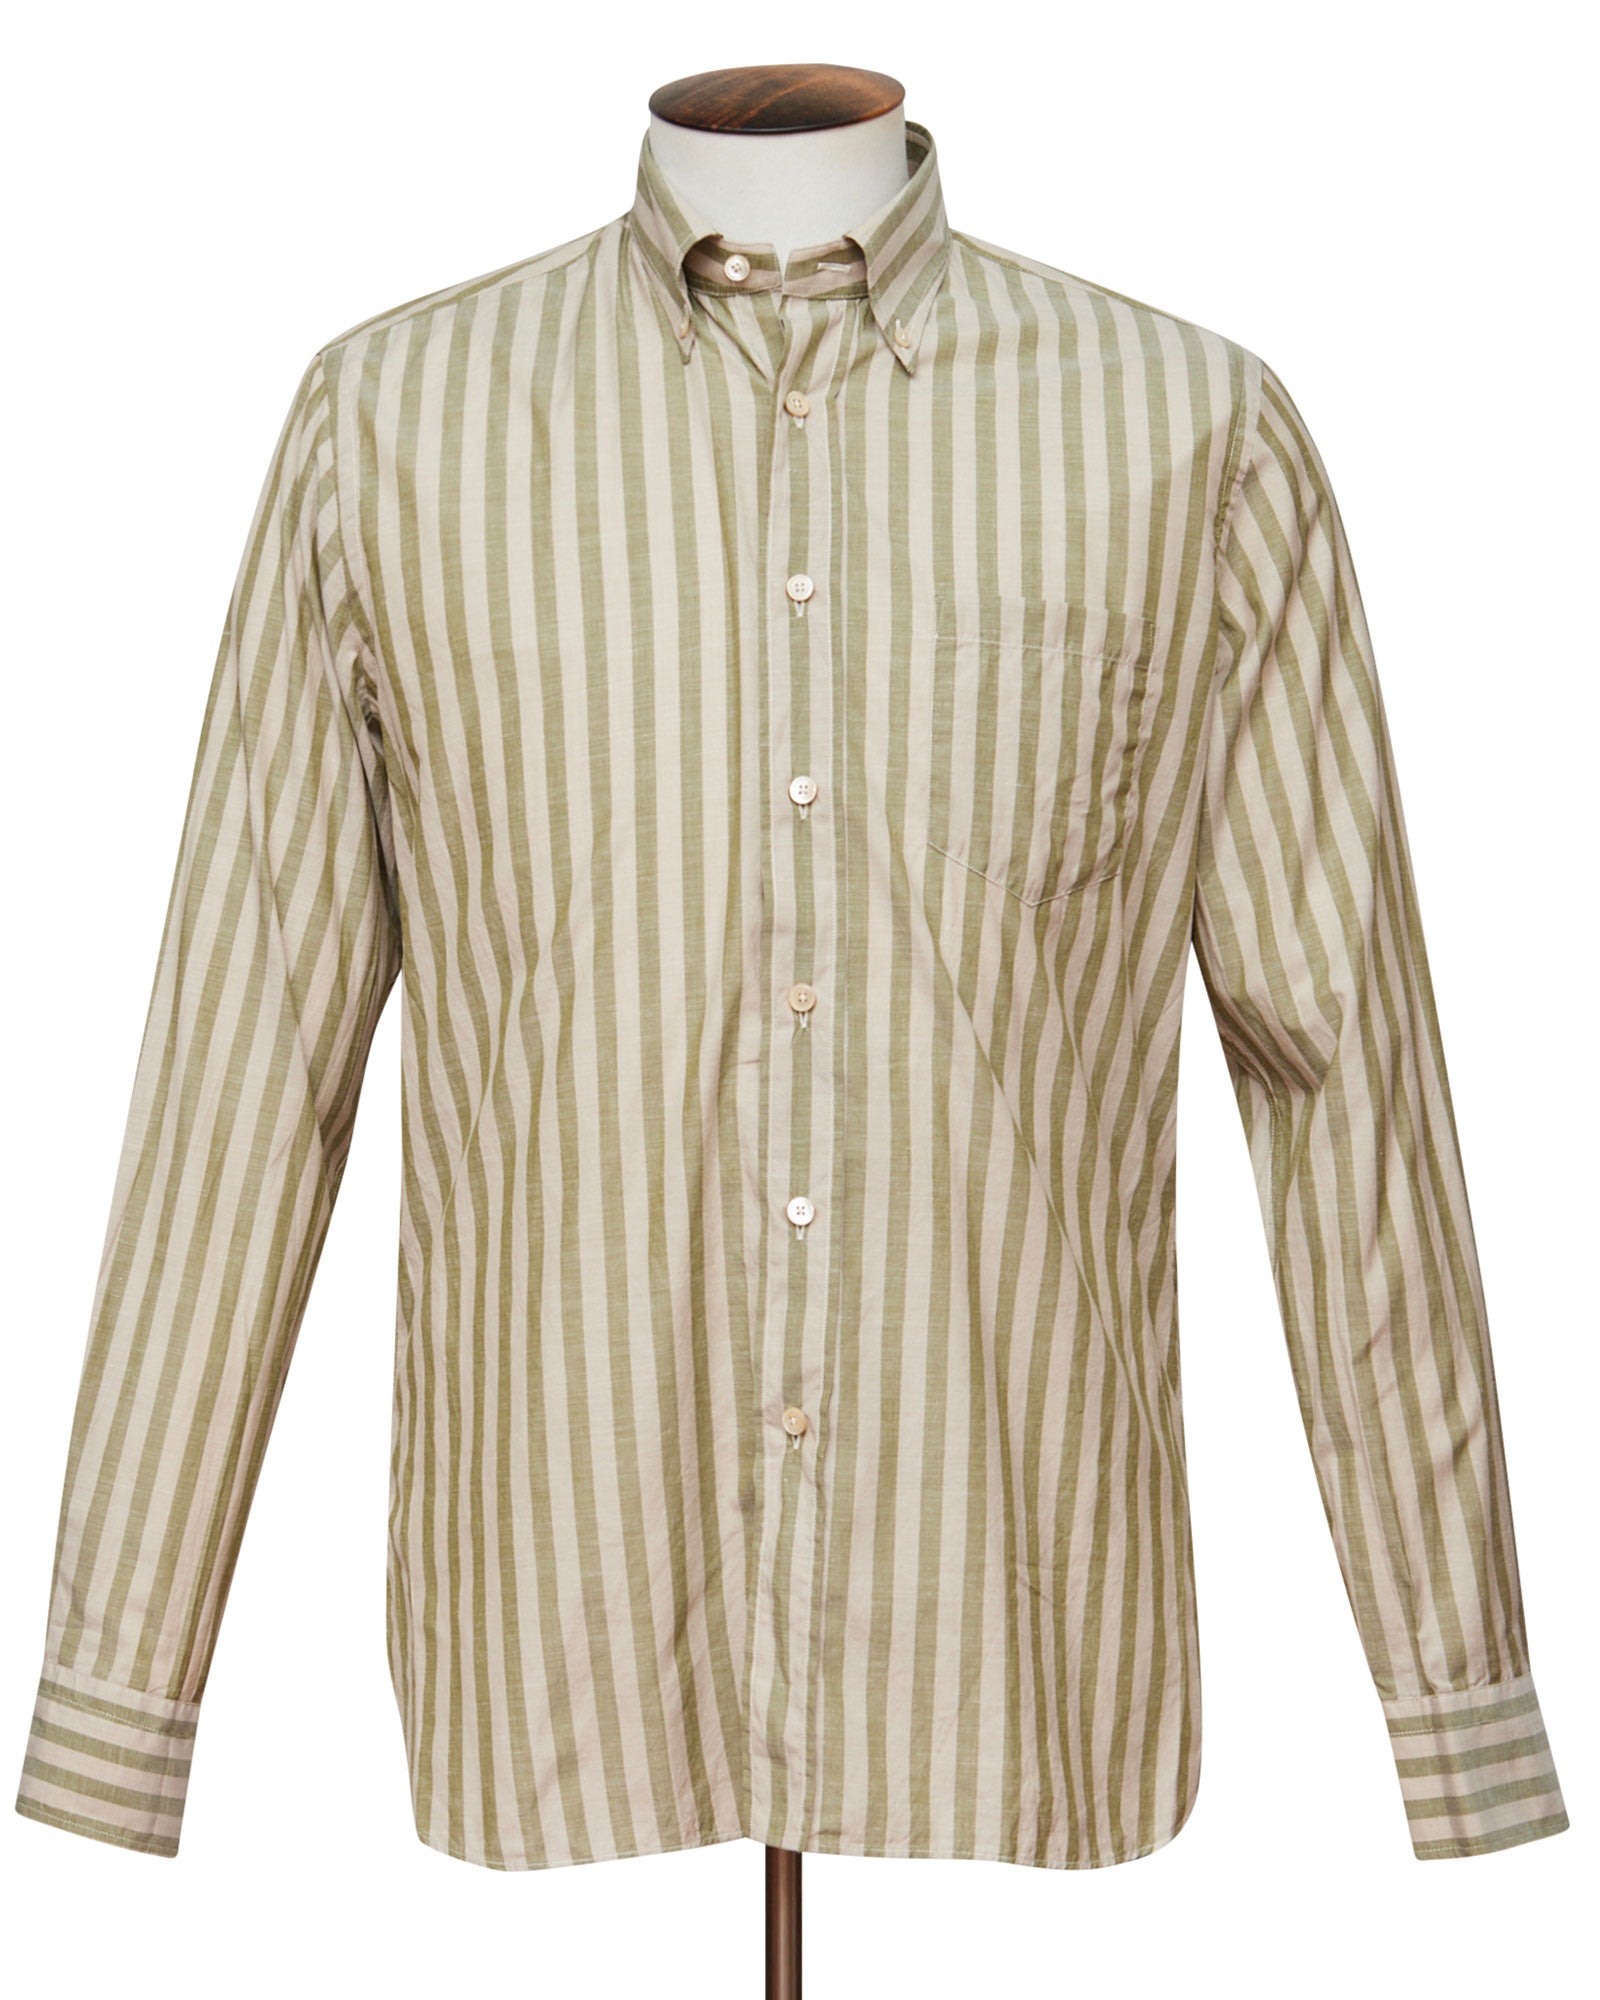 Soft Beige and Olive Stripe Button Down Shirt